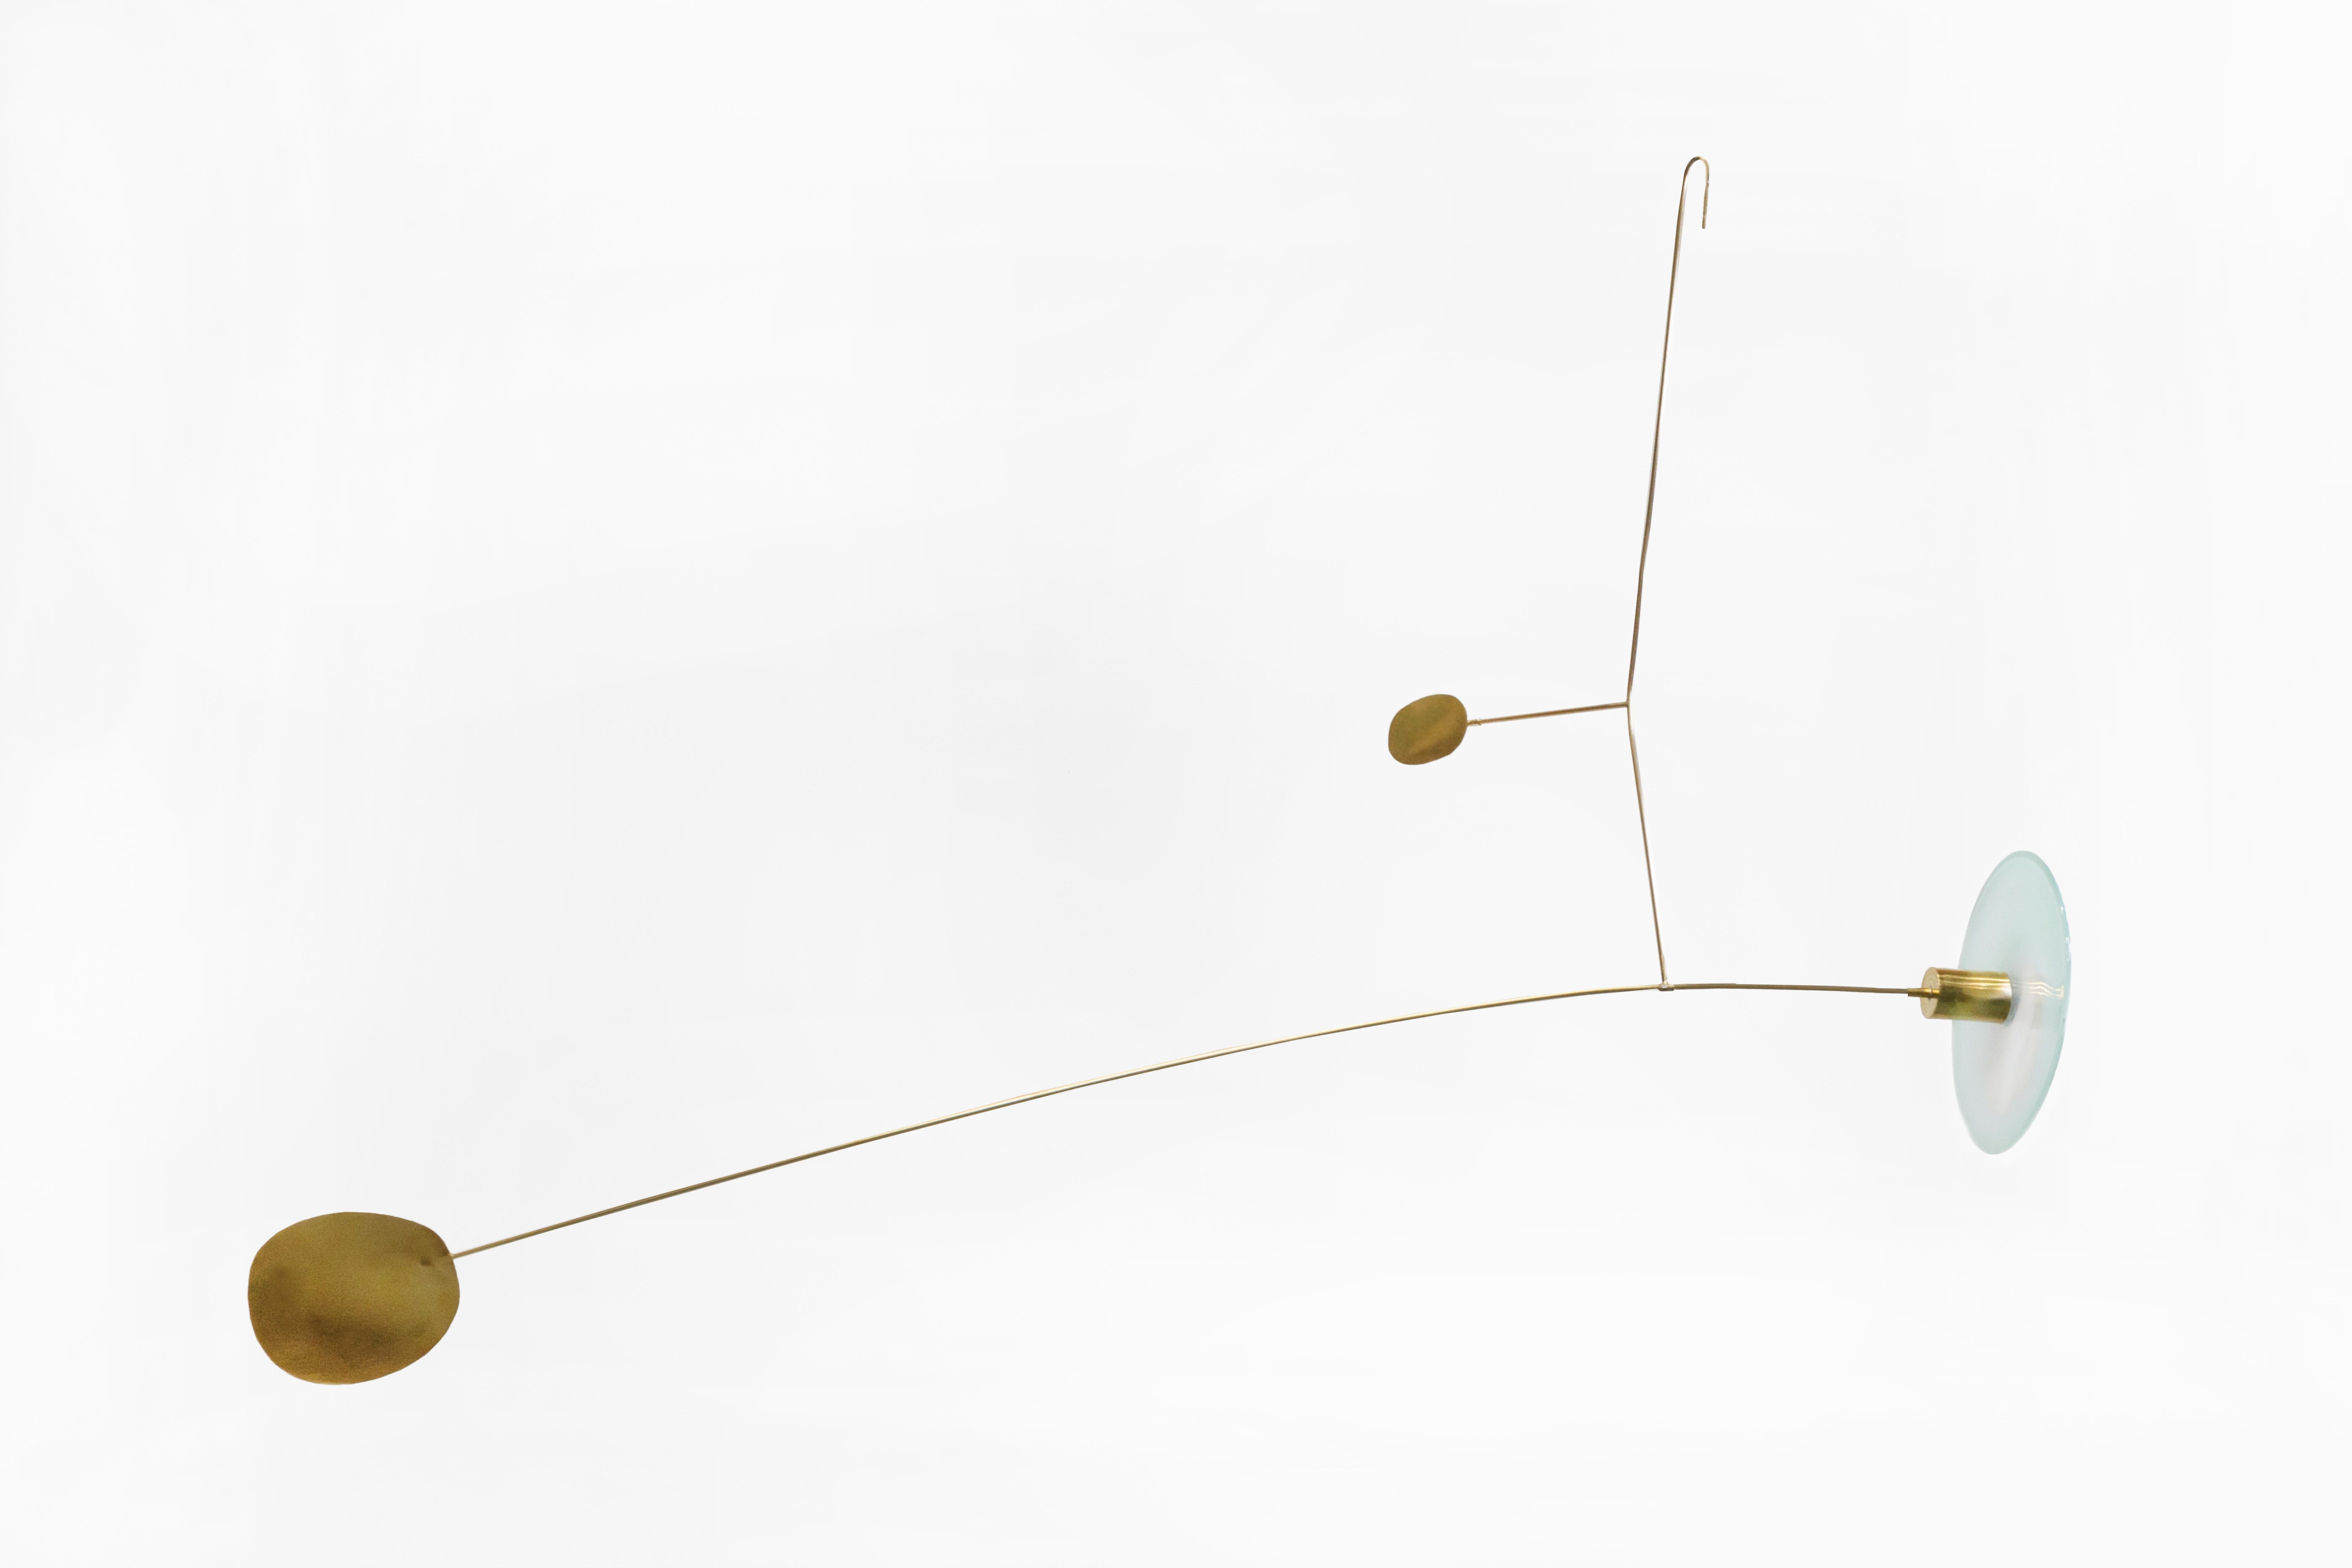 Glass mobile No. 82- by Milla Vaahtera

Dimensions: 450 x 80 x 800cm
Weight: 250g
Price: 2,800€ 

Dialogue is a series of mobiles and stabiles made of free-blown glass and hand-worked brass.

Vaahtera began to work on this series in May 2017